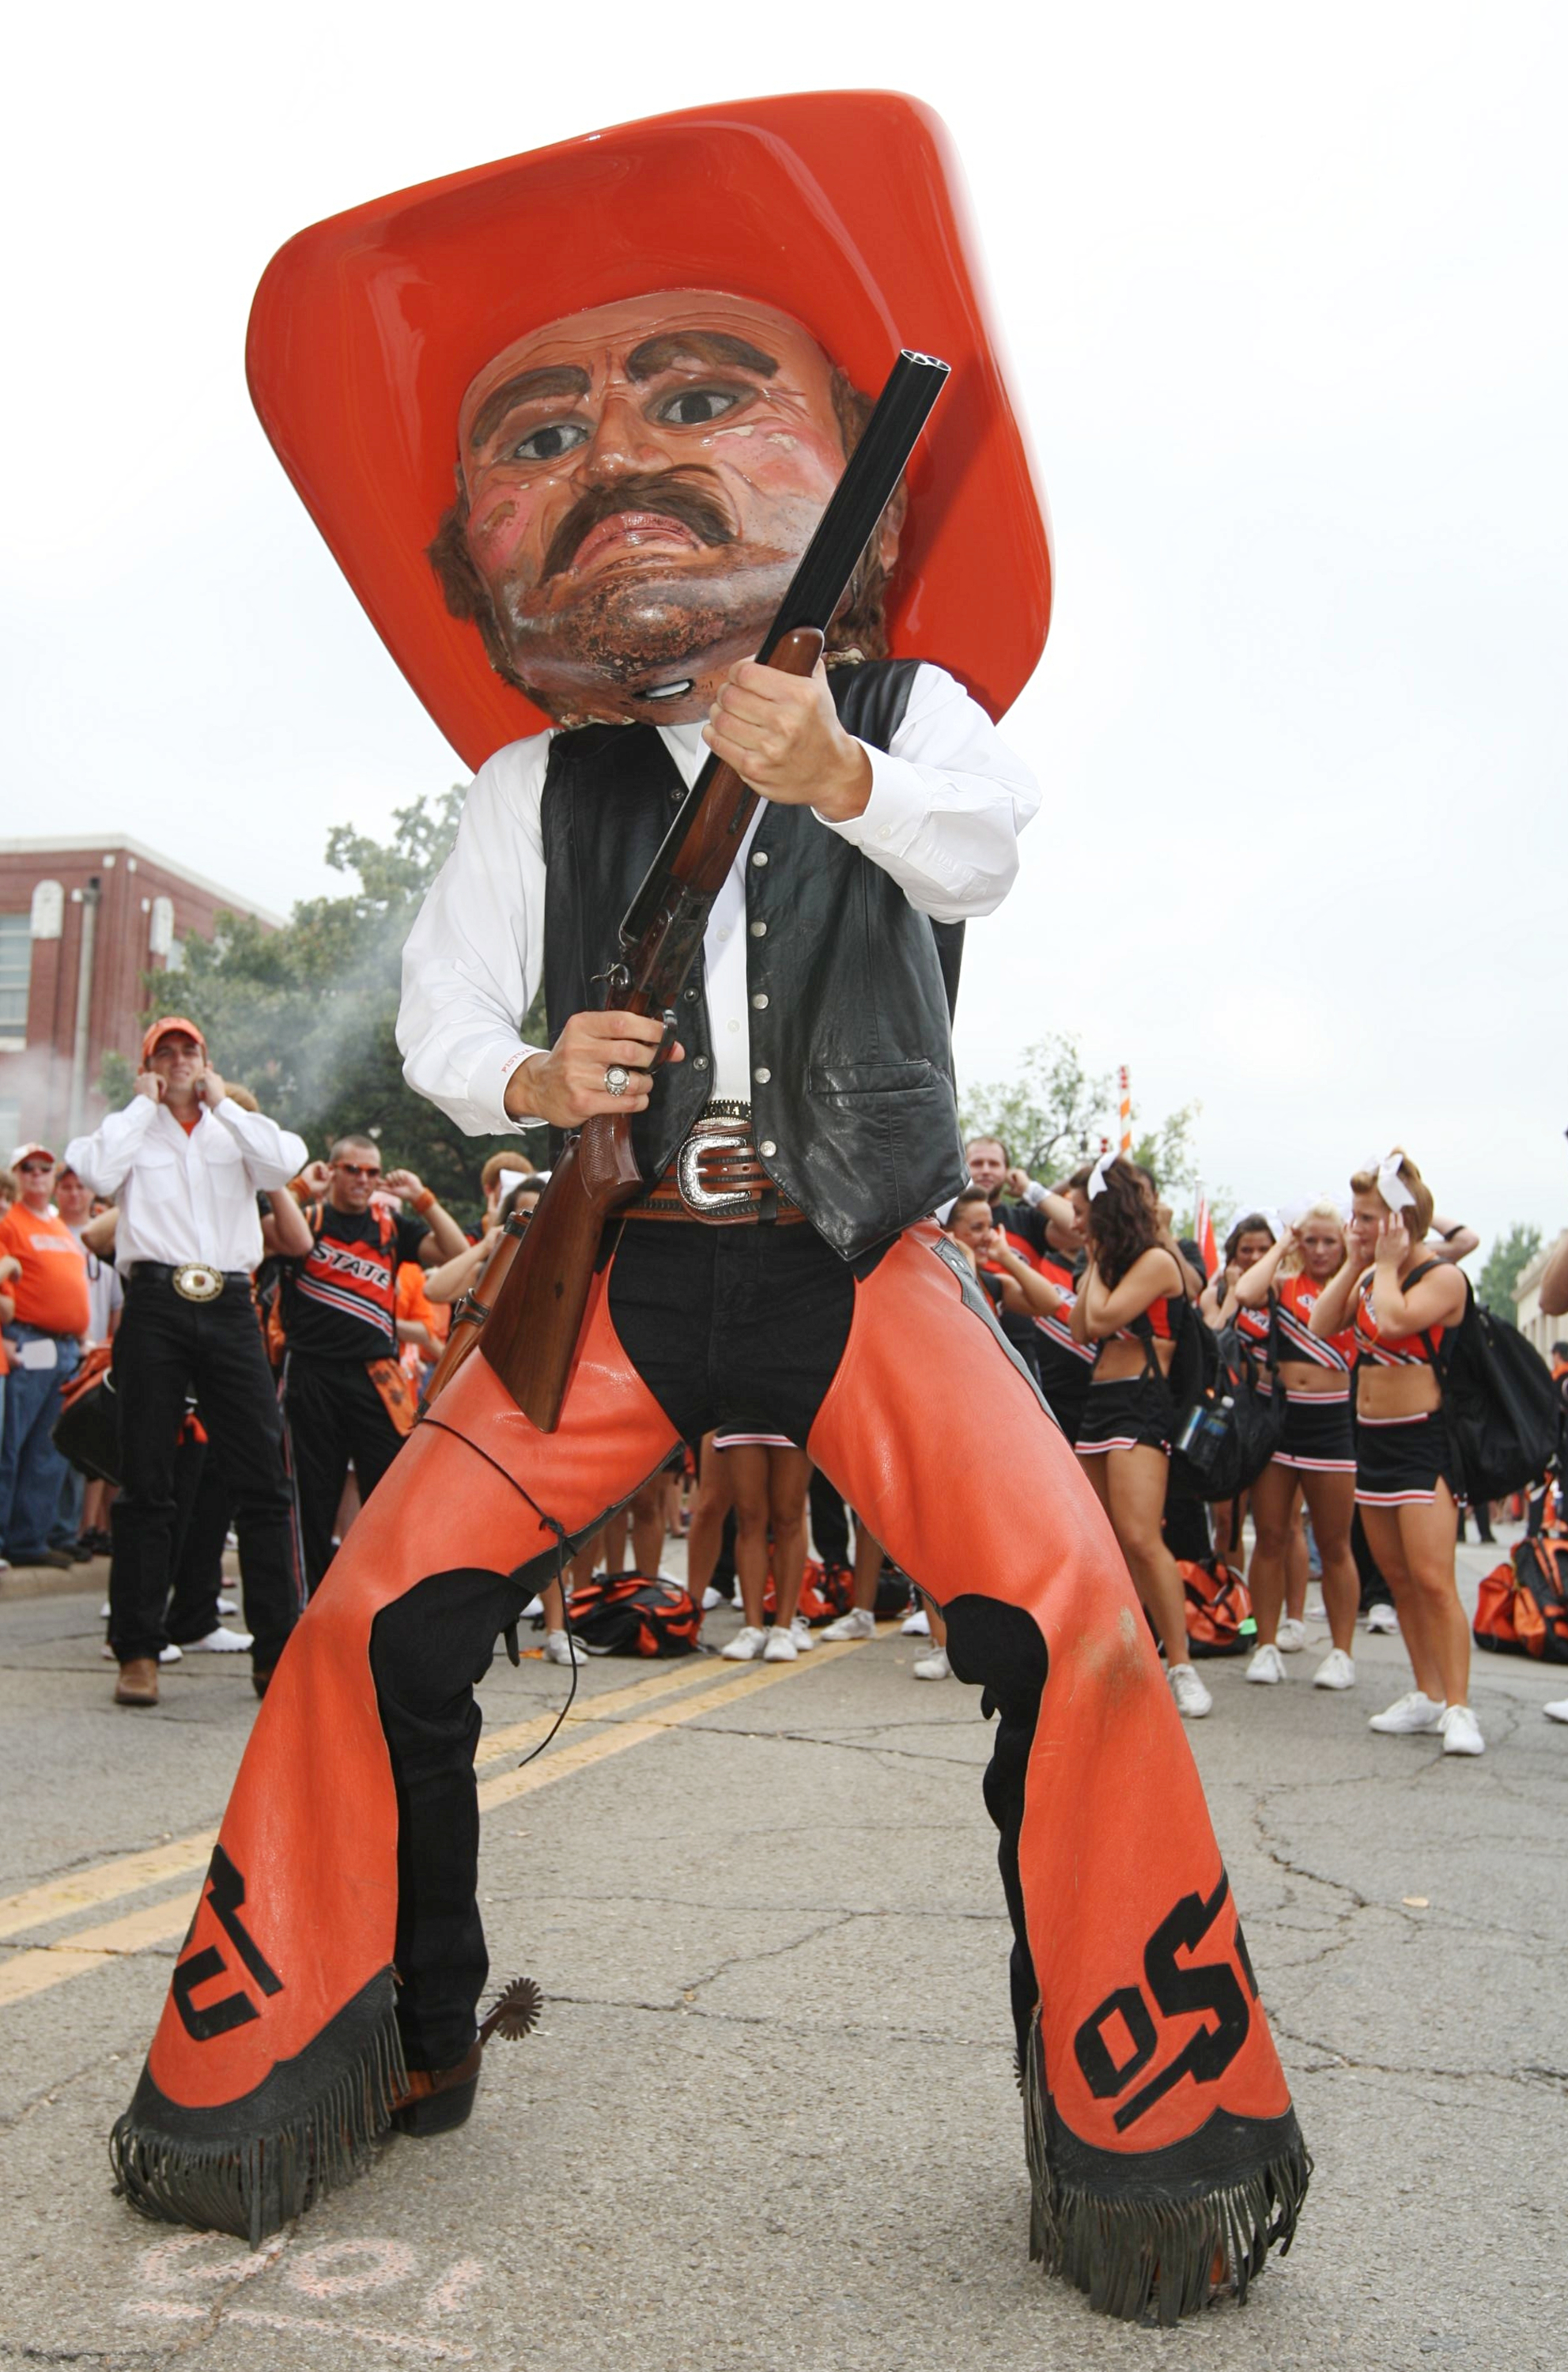 STILLWATER, OK - SEPTEMBER 5:  The Oklahoma State Cowboys mascot 'Pistol Pete' attends the tailgate party prior to the start of the game against the Georgia Bulldogs at the Boone Pickens Stadium on September 5, 2009 in Stillwater, Oklahoma. (Photo by Chri